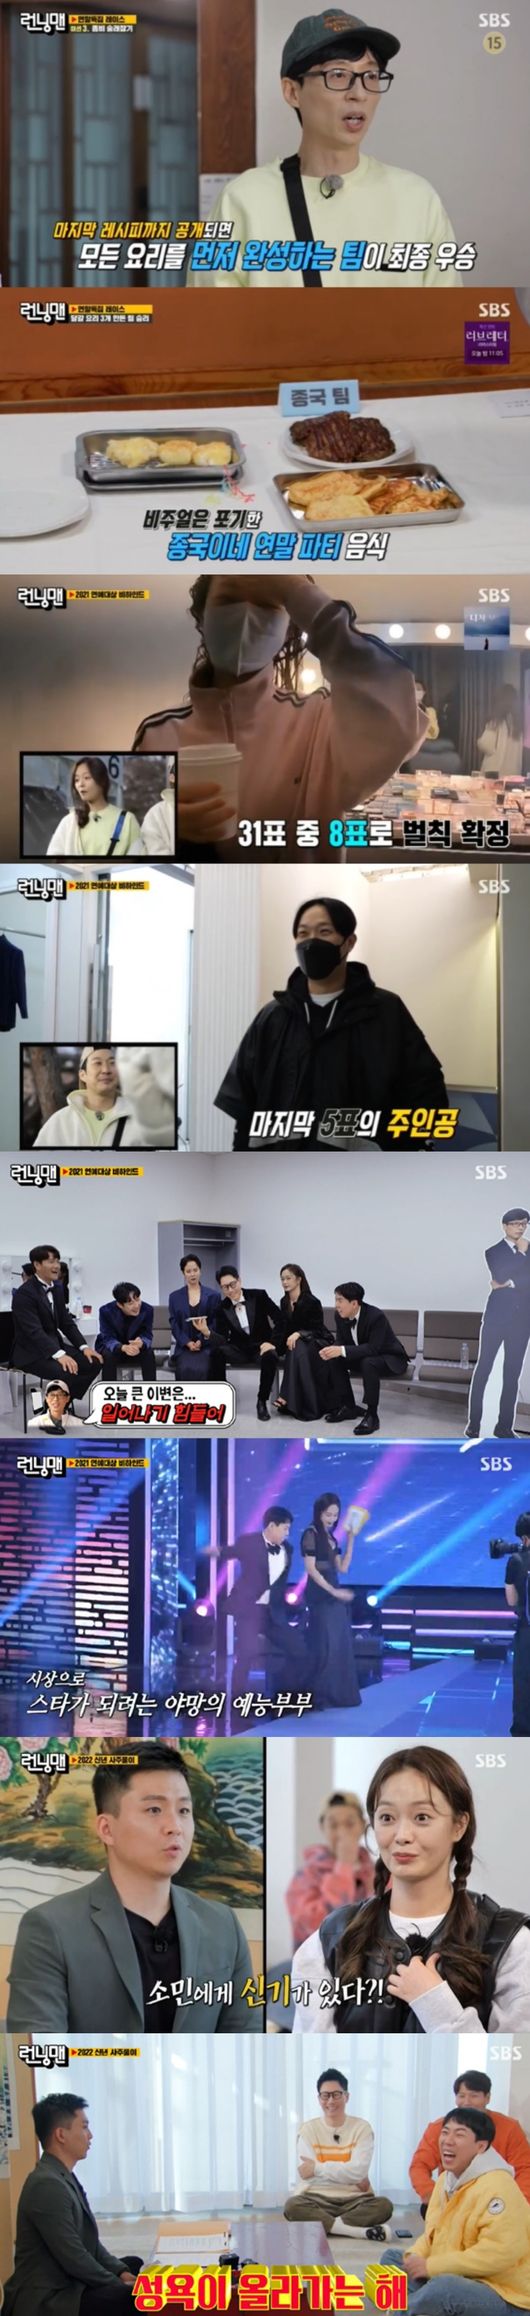 SBS Running Man kept the top spot in the TV viewer ratings of 2049 Hard Target in the same time zone.Running Man, which aired on the 26th, ranked first in the same time zone with 3.7% of the Hard Target index 2049 TV viewer ratings (hereinafter based on Nielsen Korea metropolitan area, households), and average TV viewer ratings jumped to 5.8% and the highest TV viewer ratings per minute jumped to 9.3%.The show was followed by last weeks second episode of Year-end Special Race, featuring Actor Ha Do-kwon, Cha Chung-hwa and Heo Young-ji.The final mission was conducted as a solo exhibition, and was divided into Park Jae-Seok team (Yoo Jae-suk, Ji Suk-jin, Haha, Jeon So-min, Cha Chung-hwa) and the final team (Kim Jong-kook, Ha Do-kwon, Yang Se-chan, Song Ji-hyo, Heo Young-ji) to play round-by-round confrontations. ...As a result of the game, Heo Young-ji, Cha Chung Hwa and Kim Jong-kook played with two individual eggs, and Park Jae-seok team allowed the team to win the championship by one egg.With all Park Jae-seok teams and Song Ji-hyo becoming penalty candidates, those who will be penalized by voting were decided to Ji Suk-jin, Jeon So-min and Haha.The three decided to release the preparation process of the 2021 SBS Entertainment Grand Prize.Ji Suk-jin Jeon So-min Haha, who is subject to the penalty, actually laughed after being followed from the makeup shop on the day of the 2021 SBS Entertainment Awards.Since then, Yang Se-chan and Jeon So-min have been introduced to prepare for the awards and Ji Suk-jins activities, and introduced an interesting behind-the-scenes story of the Entertainment Awards.In addition, the new years fortune-telling of the members was also released on the show in 2022, and experts said, We have been lucky since 2022.When you look at Love, you see a bad guy because you dont see a man, and you meet a bad guy, he said.Theres a novelty, Jeon So-min said, if Actor didnt work, she could have been a good-natured bodhisattva.I want to take a lip stamp, said Jeon So-min, who said, I want to take a lip stamp.As for Yang Se-chan, he said, I like young women, and this year my sexual desire goes up.The expert said, It is a general luck, he said. It is a comedian, but you can also get in touch with the drama.In particular, when I mentioned There seems to be another woman in Yang Se-chan mind now, Jeon So-mins Furious was created, and this scene recorded 9.3% of the best TV viewer ratings per minute, which was the best one minute.On the other hand, next weeks broadcast will be interested in the debut of Jeon So-mins Ima Pak Dosa for Yo Jae-Suk